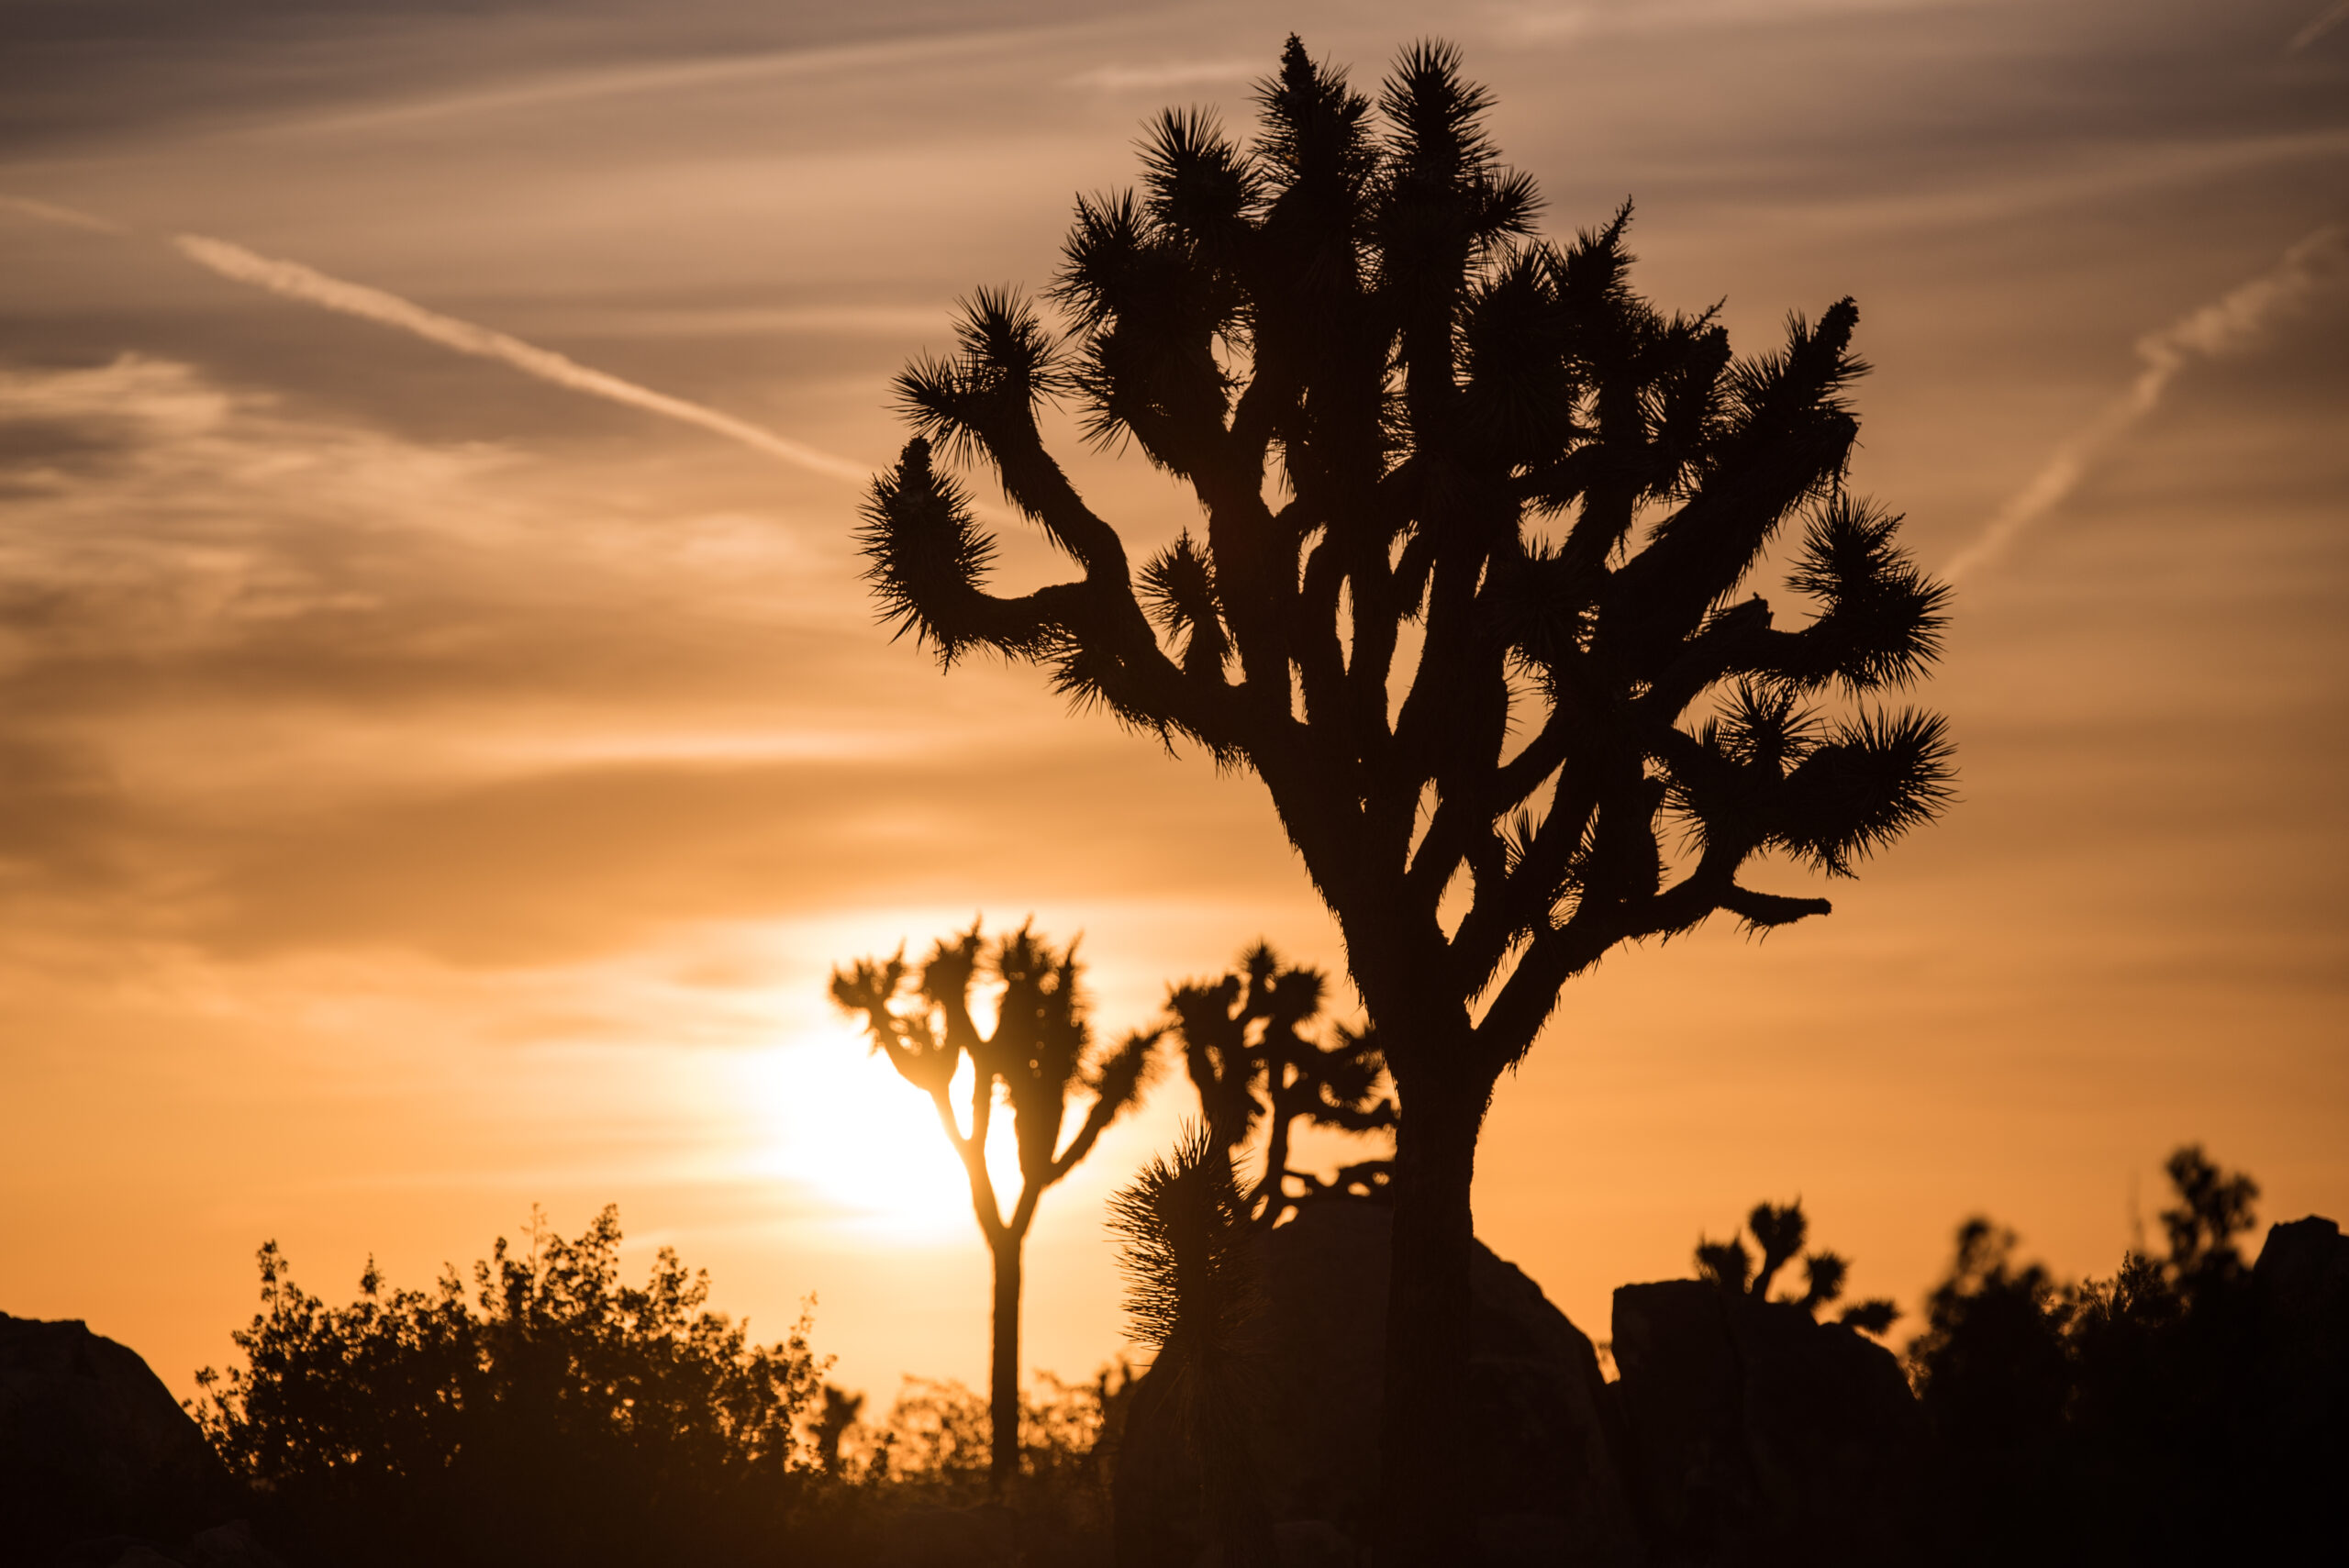 An orange sunset with Joshua Tree's and bushes shadowed in the foreground.